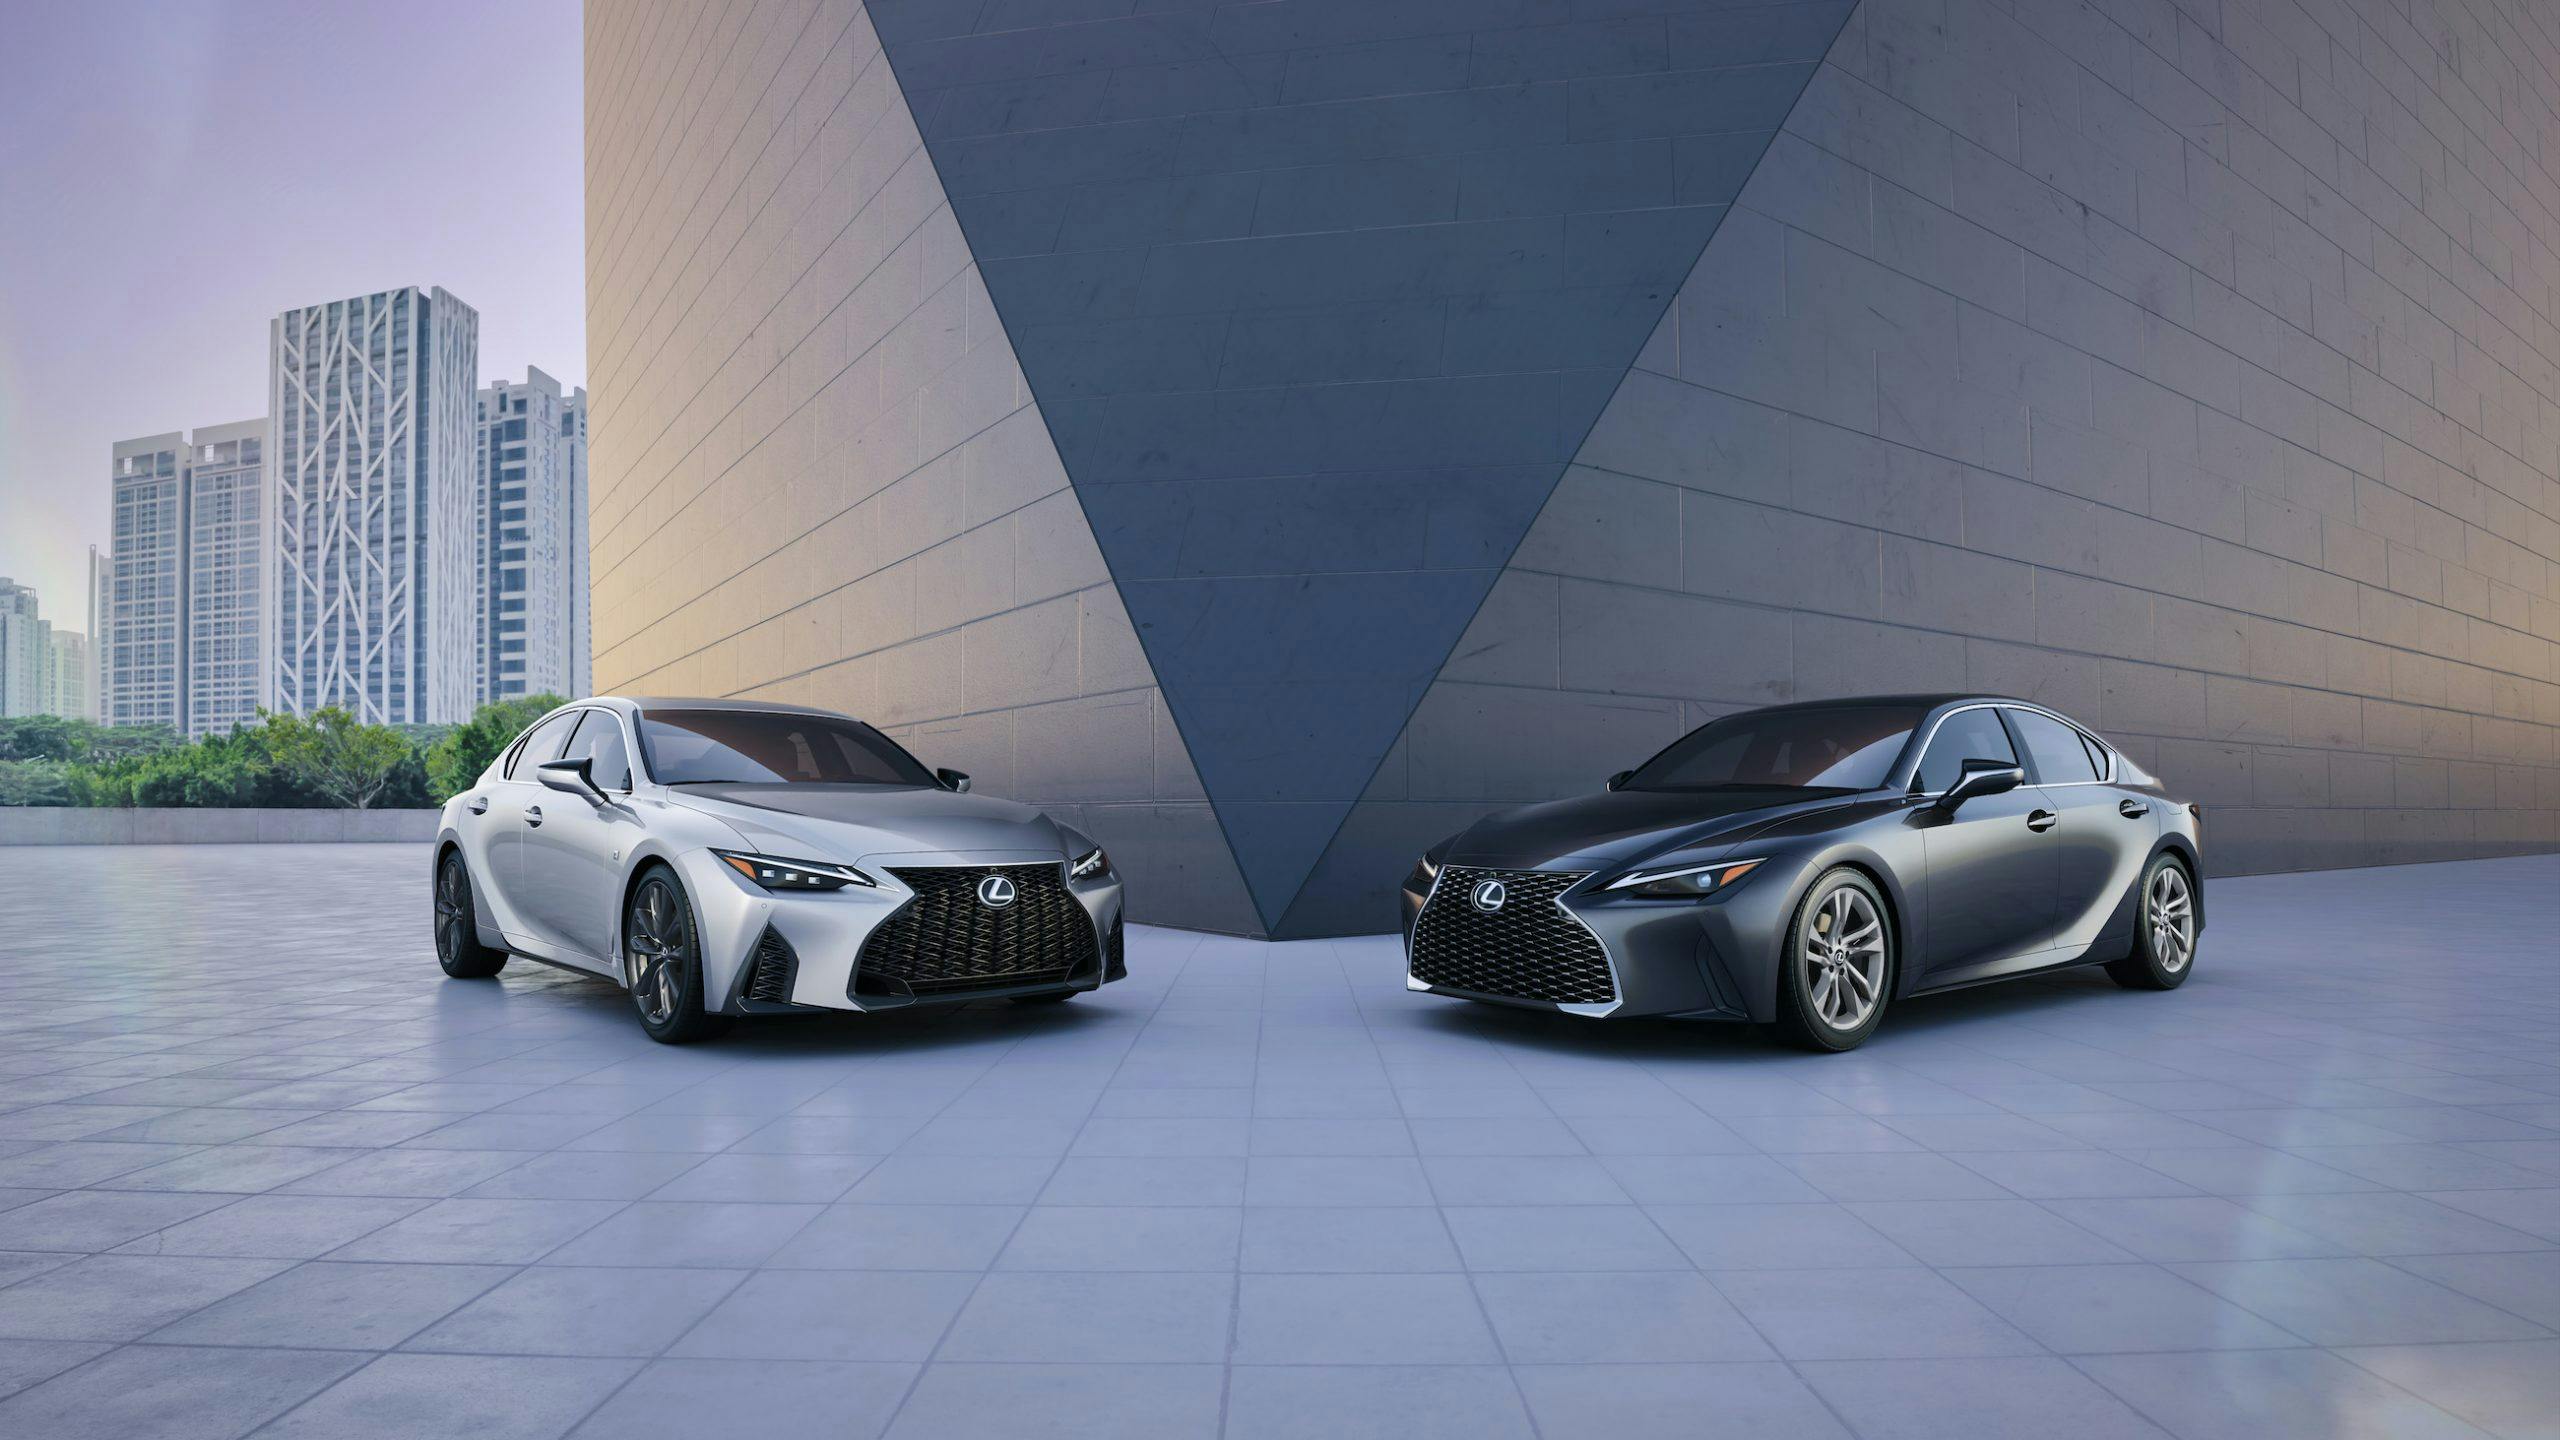 2021 Lexus IS 350 F Sport and IS 300